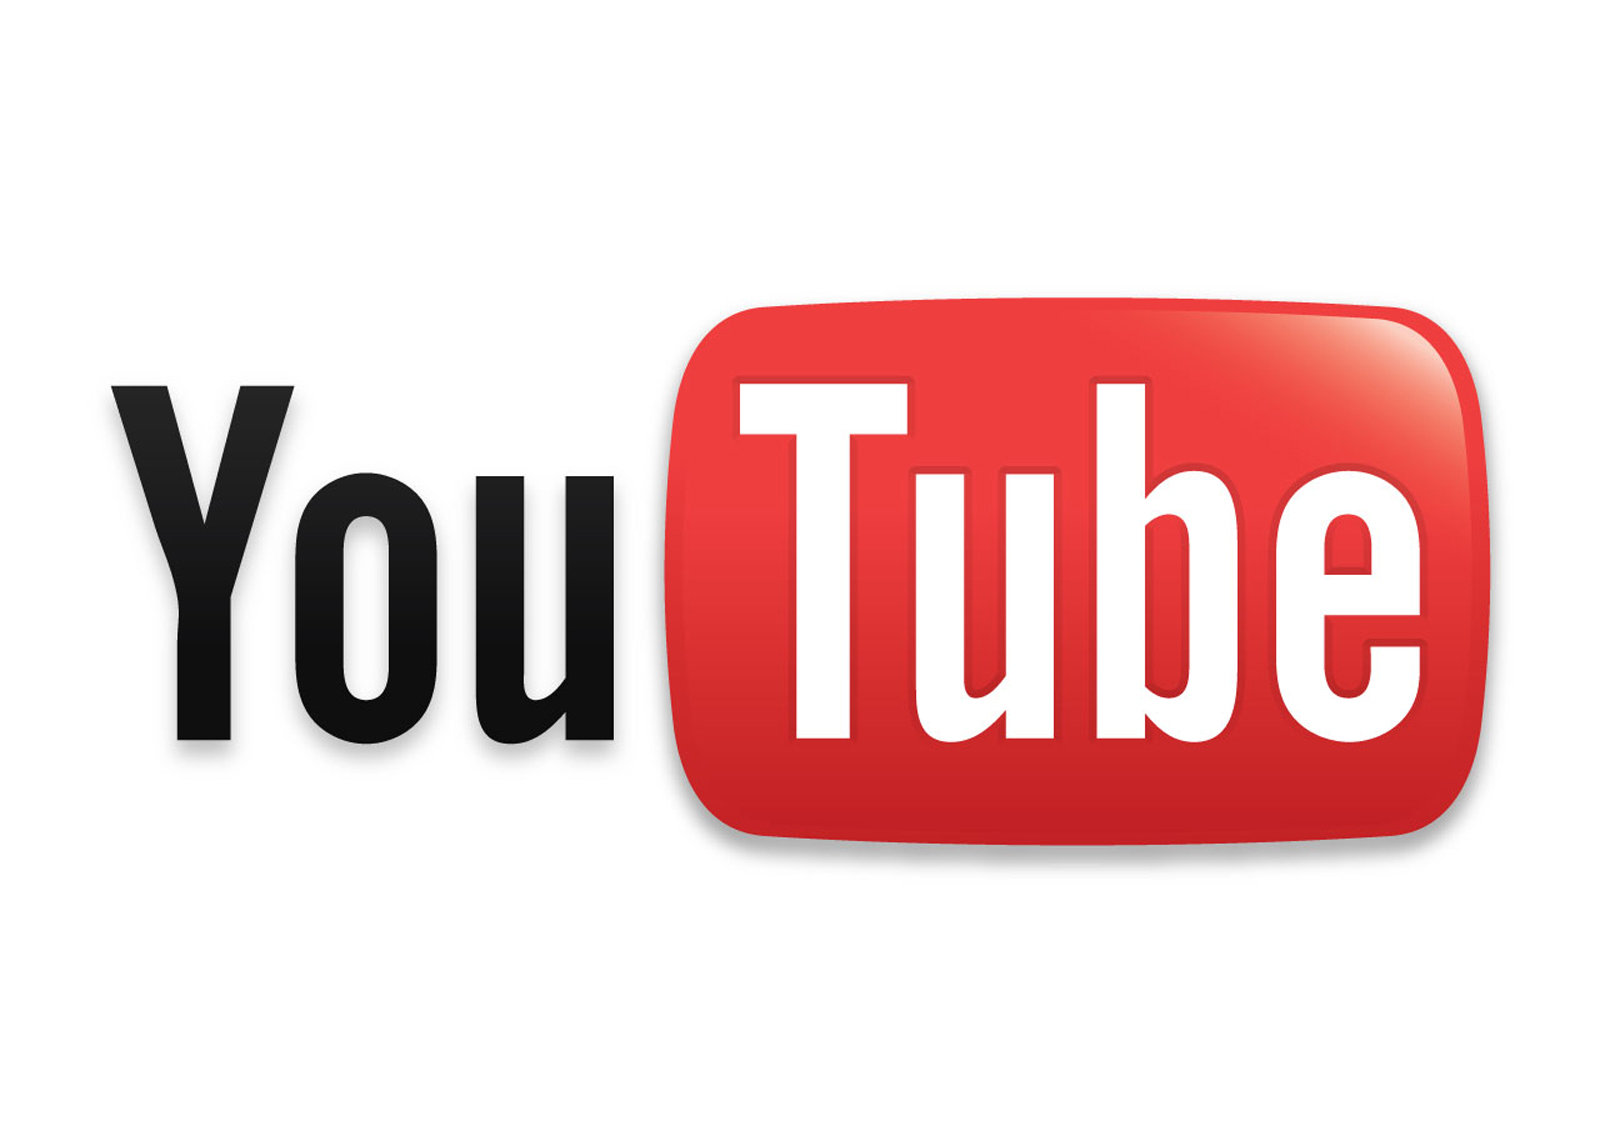 Youtube HD Logo Wallpapers Download Free Wallpapers in HD for your